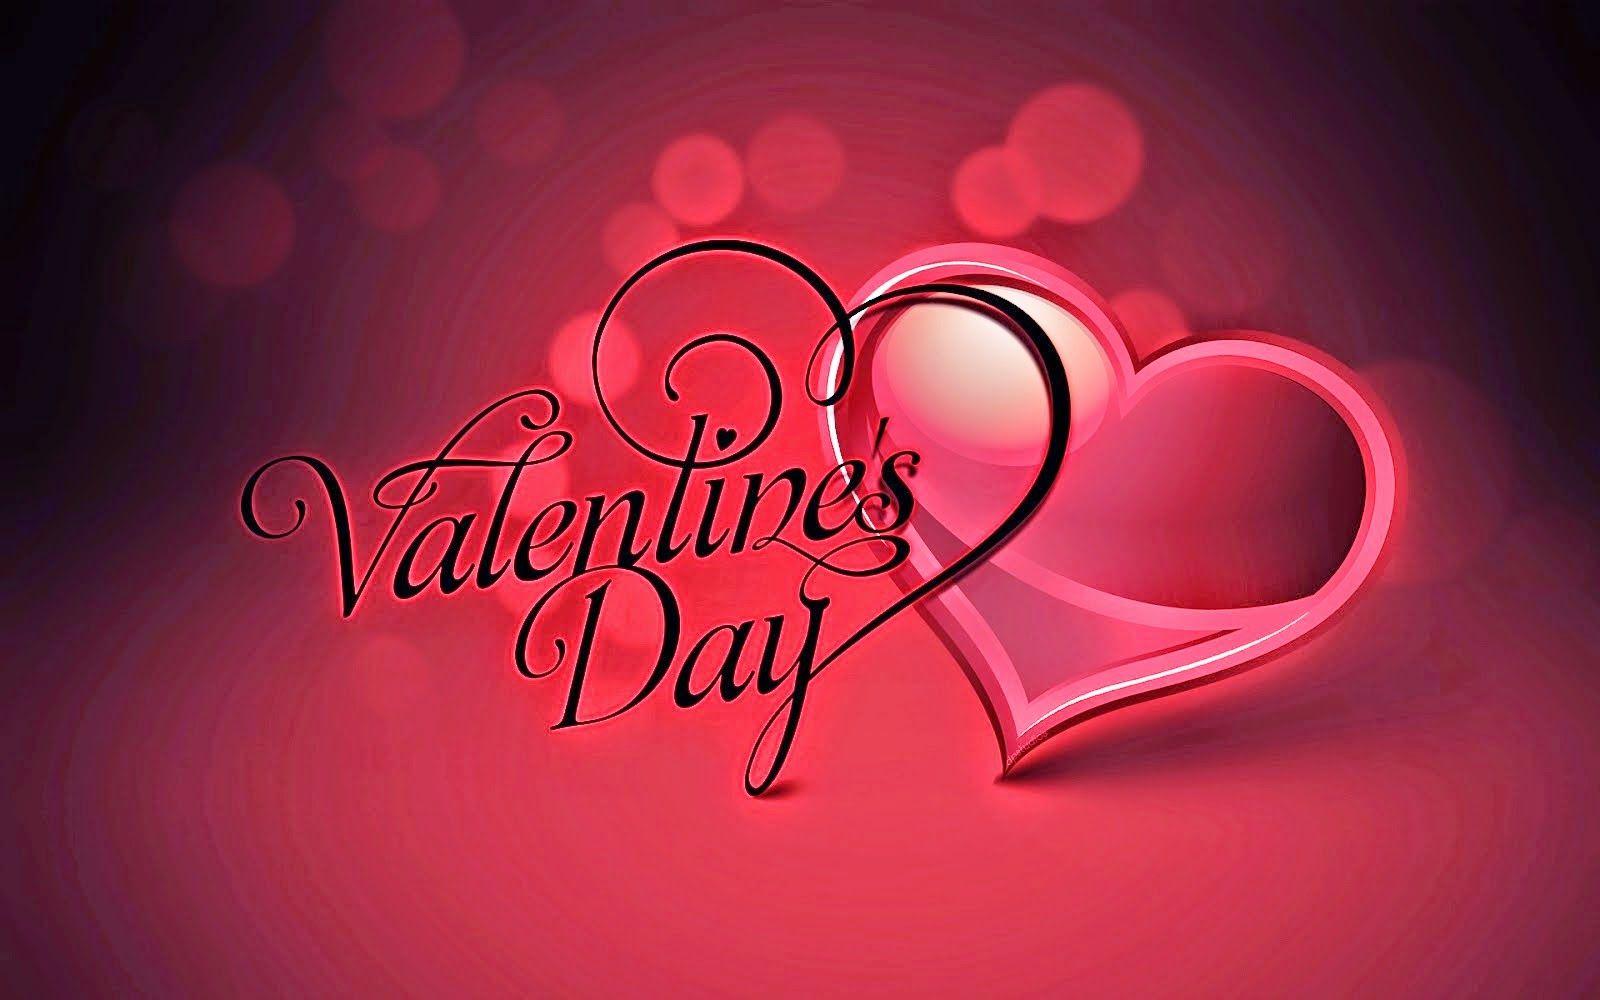 Valentine's Day Quotes Wallpaper. Valentine's Day Quotes n